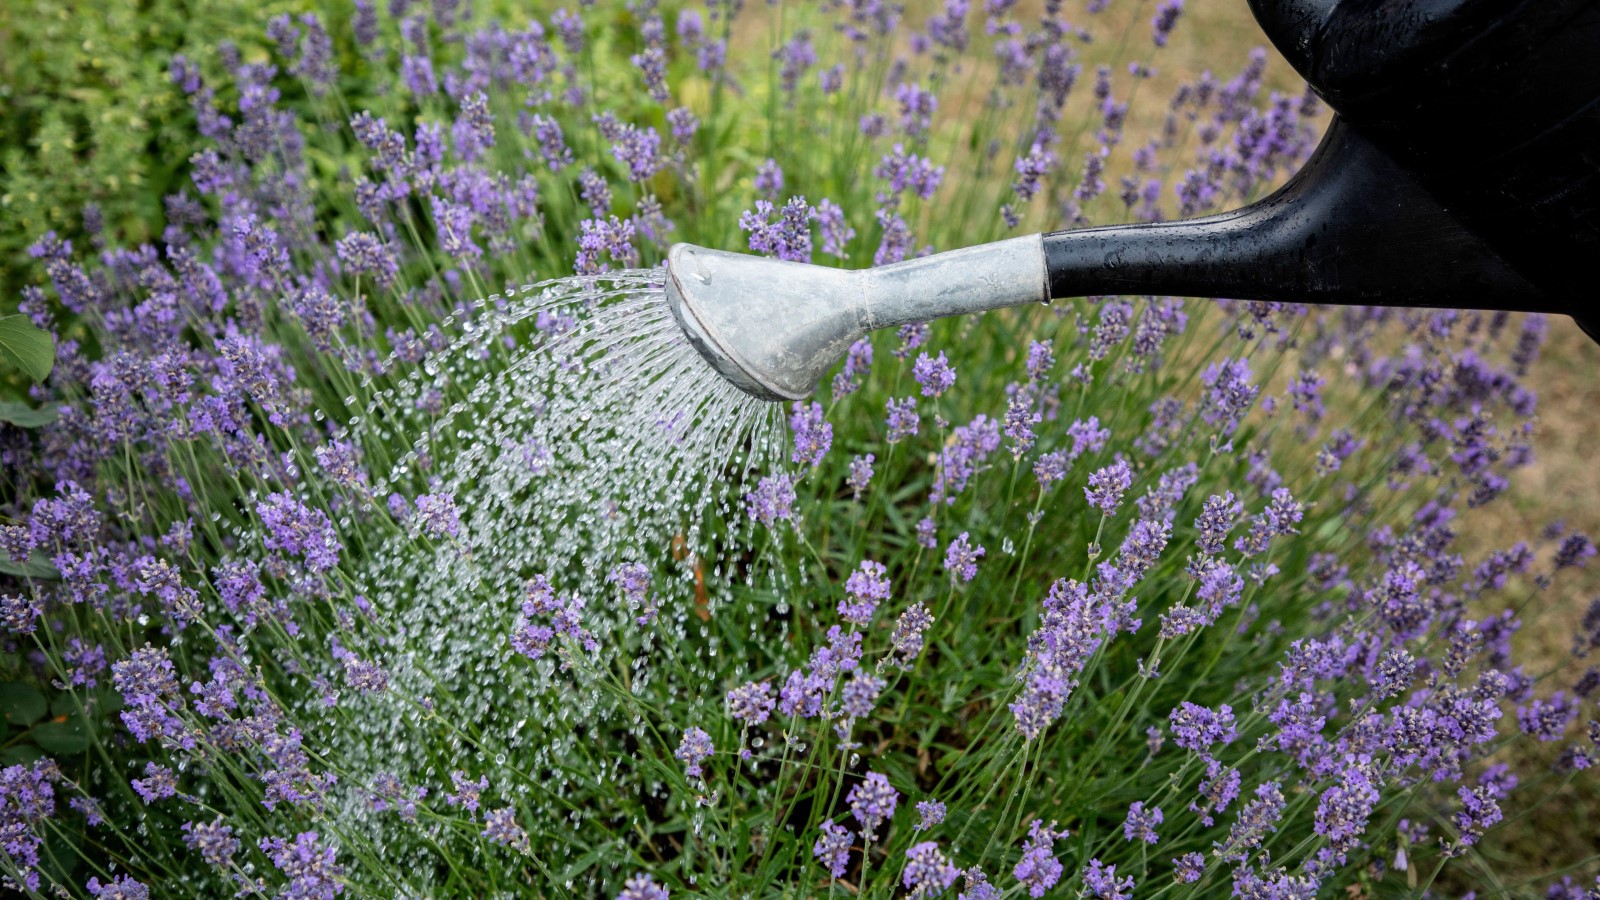 Expert tips for watering lavender to avoid ‘loving it to death’